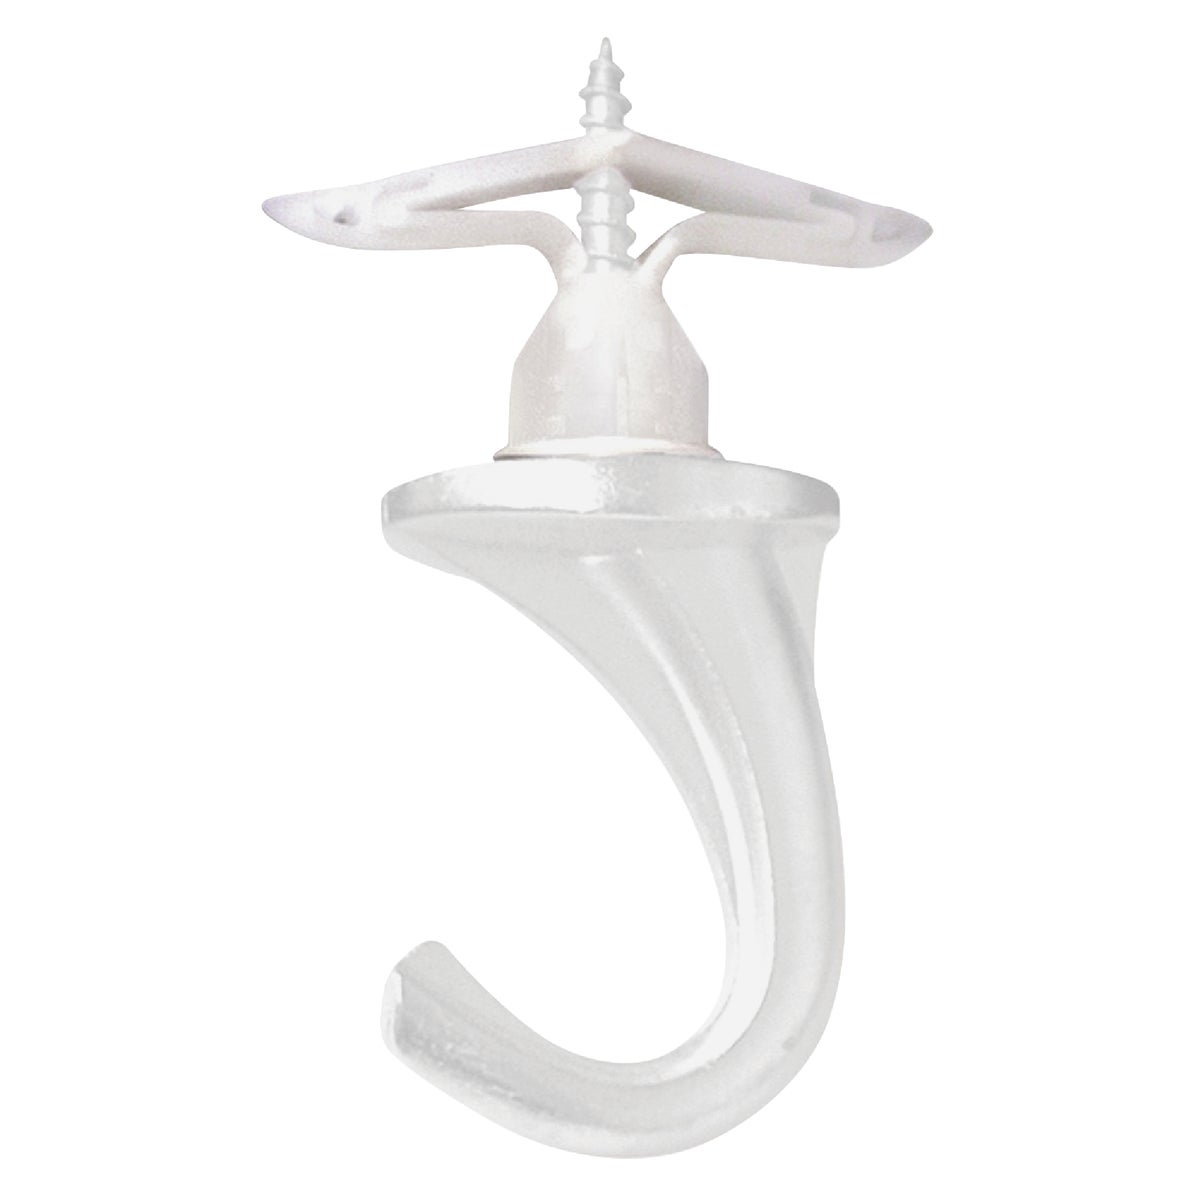 Item 738699, Large Versa Hook features a white finish and is made of durable nylon 